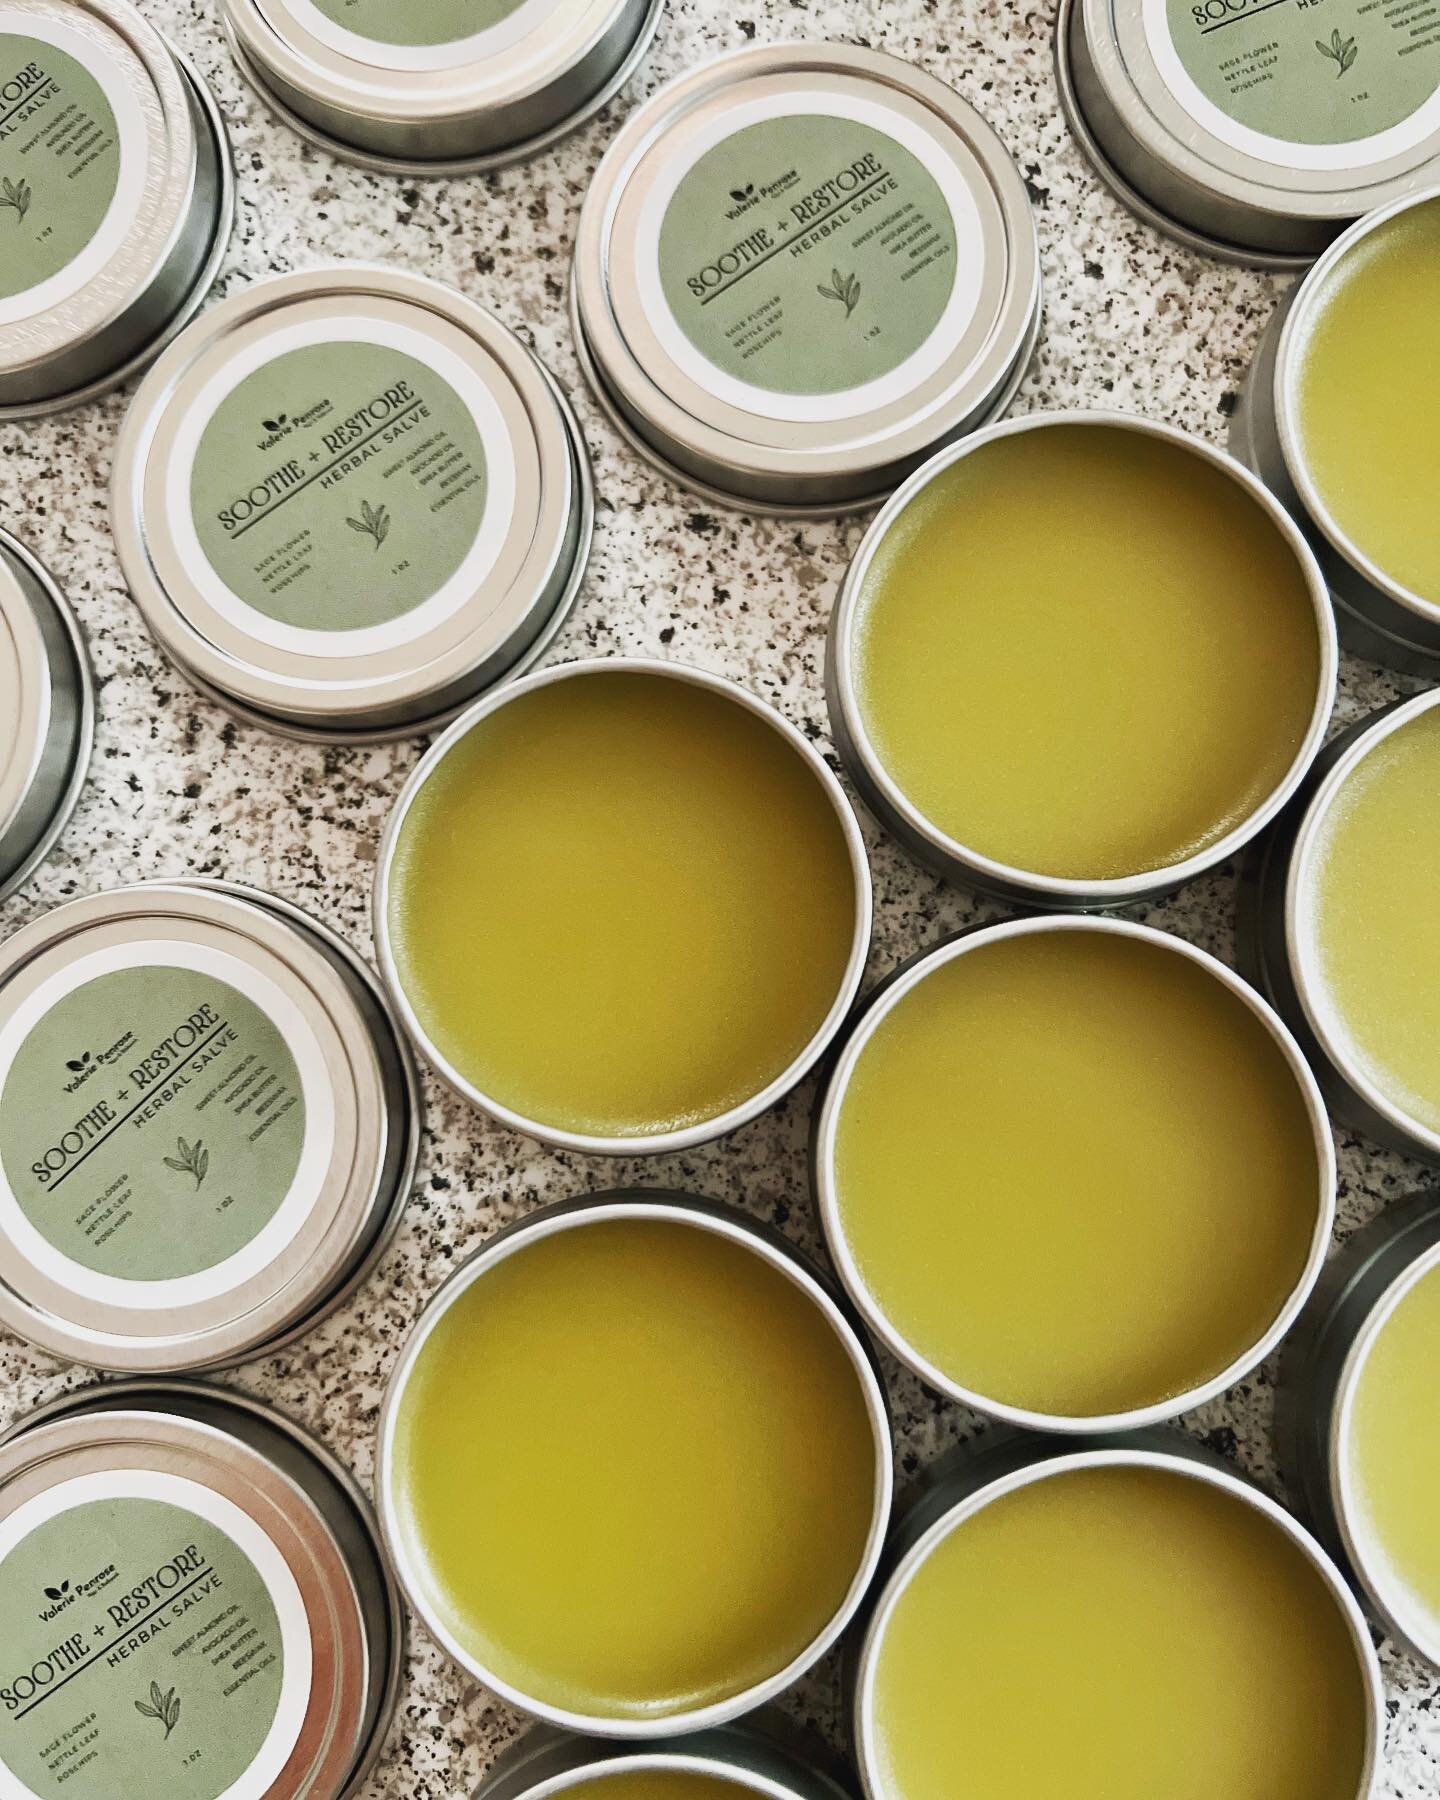 Soothe and Restore Herbal Salve 🌱 
 
Sage flower, nettle leaf and rosehips boost anti-inflammatory, anti-microbial, and anti-oxidant properties to alleviate minor aches and pain, calm irritation, and reduce the appearance of fine lines and scars. 

